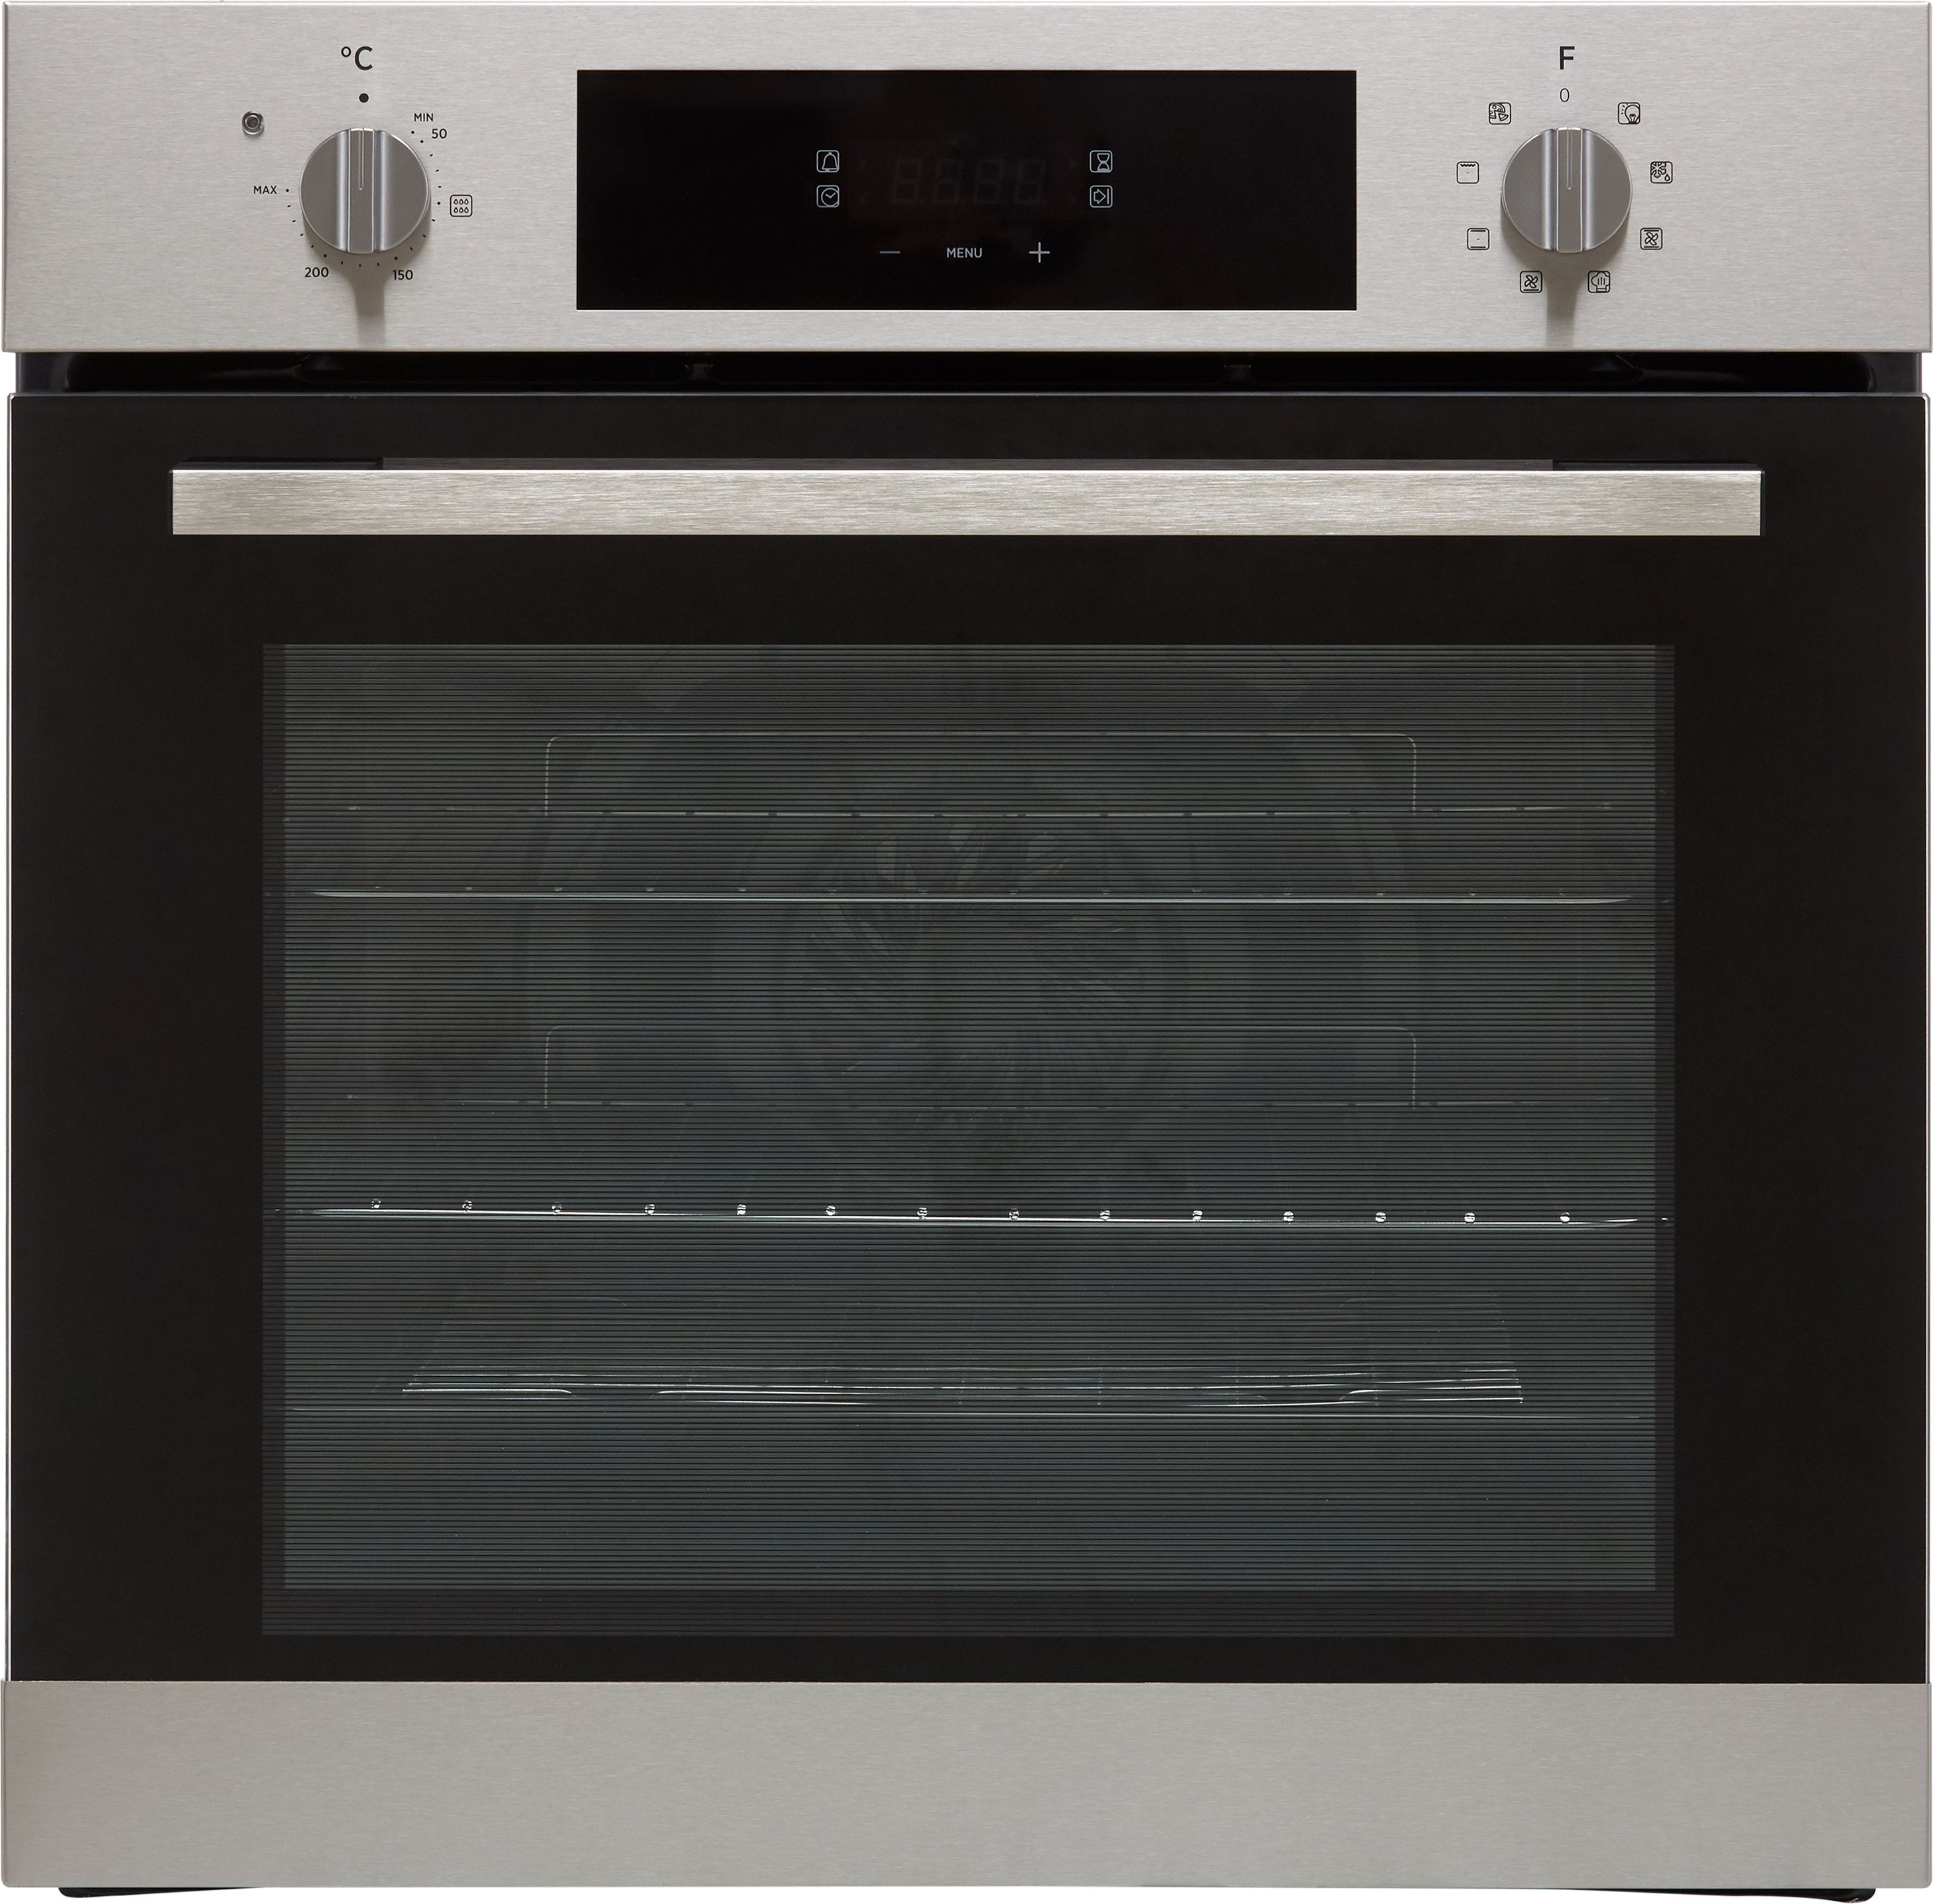 Hoover H-OVEN 300 HOC3BF3058IN Built In Electric Single Oven - Stainless Steel - A+ Rated, Stainless Steel